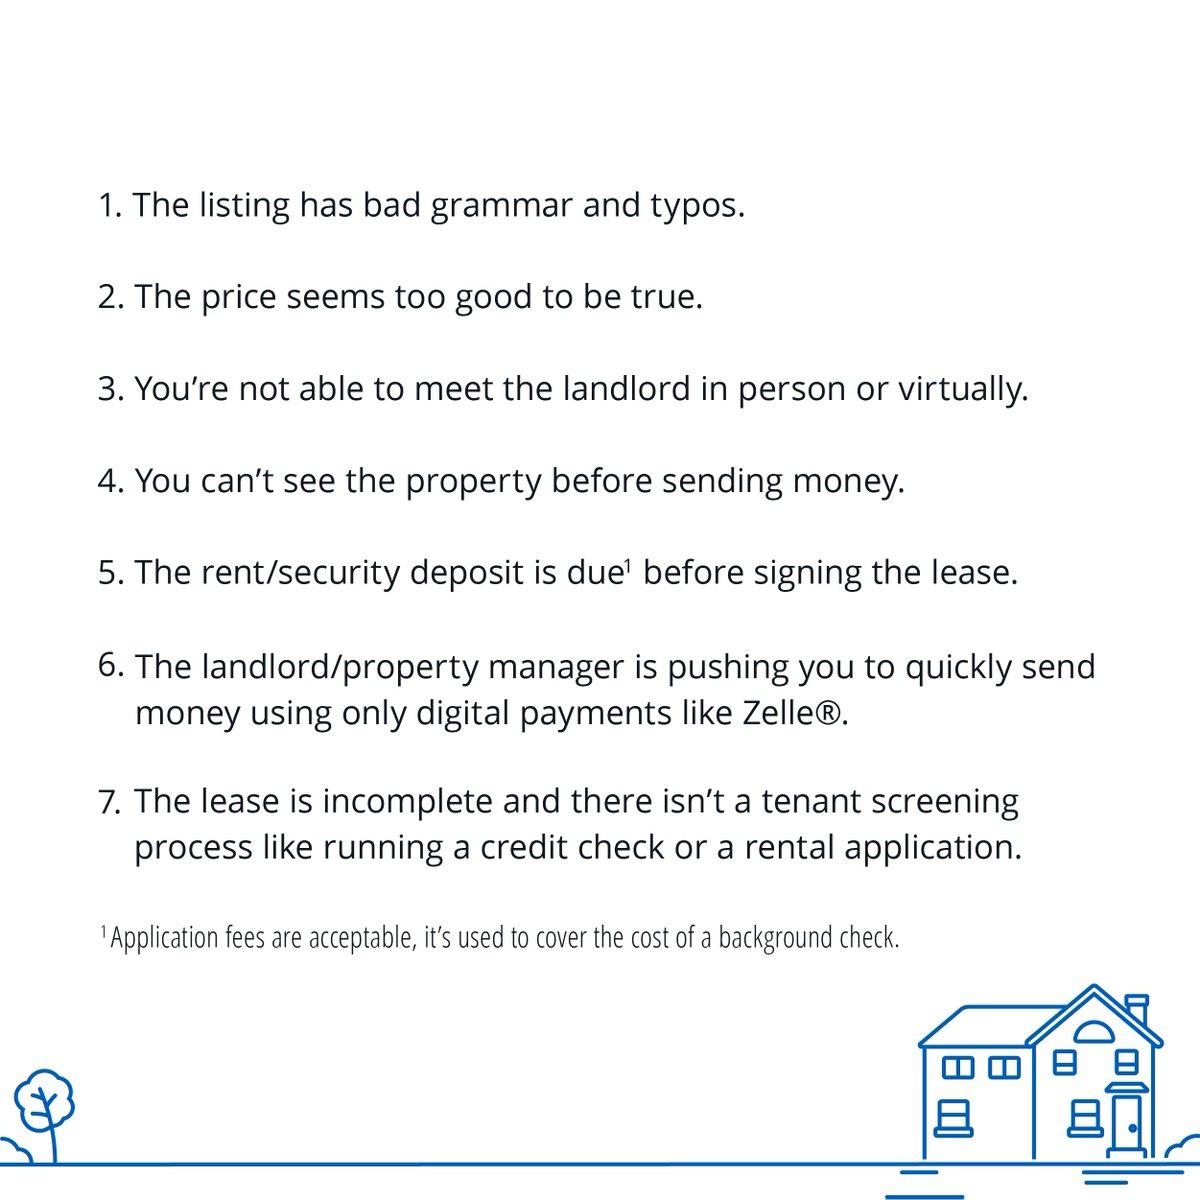 Make sure the rental listing you found on social media isn’t a scam. Oftentimes, they will ask you to send a payment right away using a digital payment like Zelle® before signing a lease Help protect yourself: chase.com/personal/secur… #scamawareness